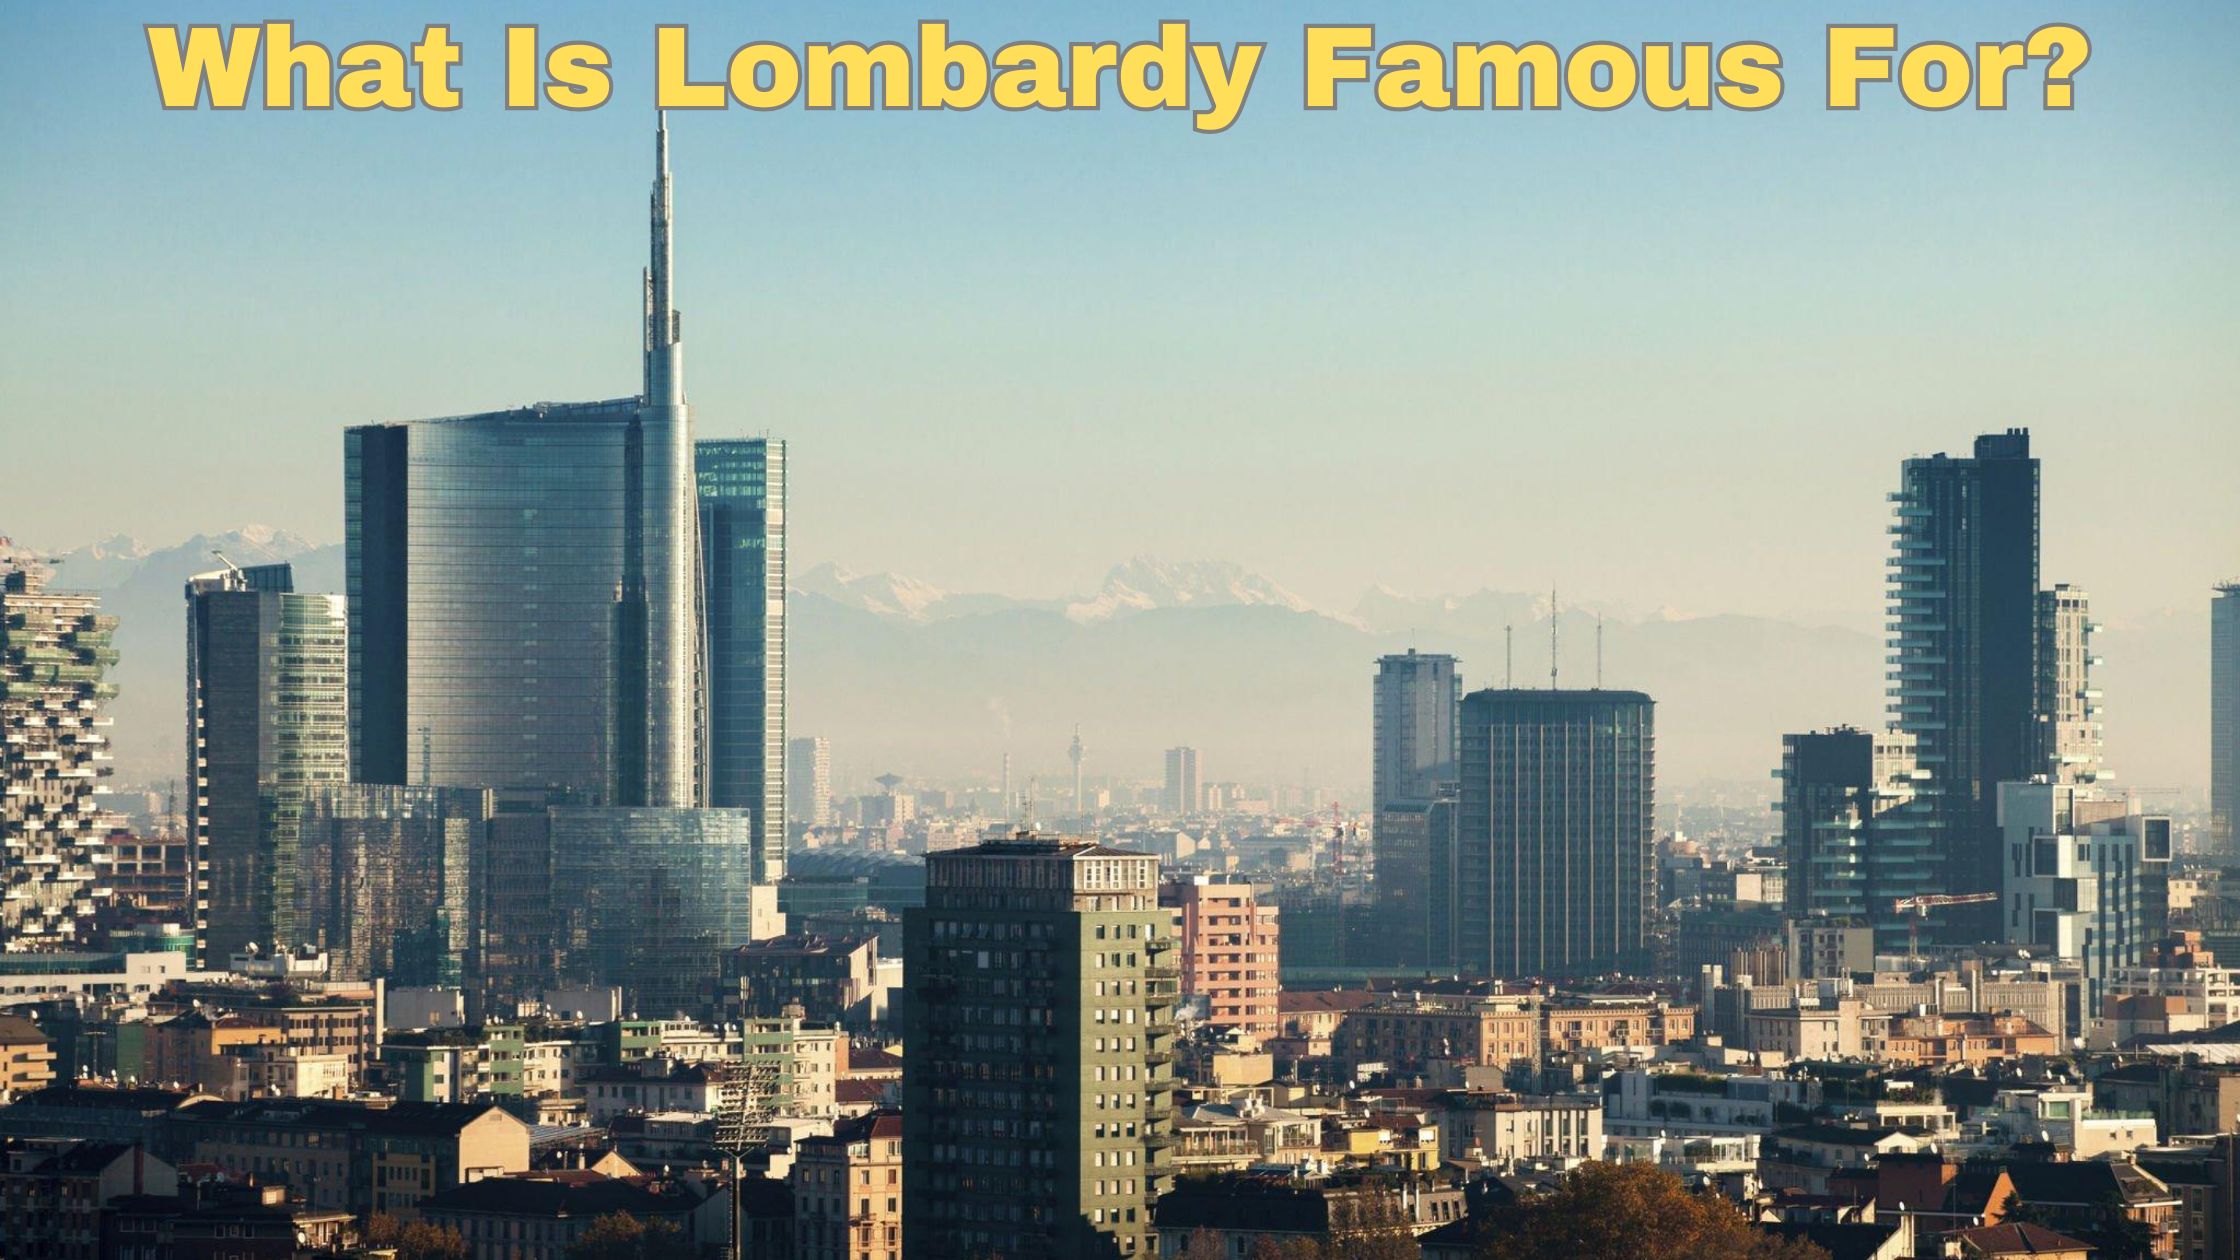 What Is Lombardy Famous For